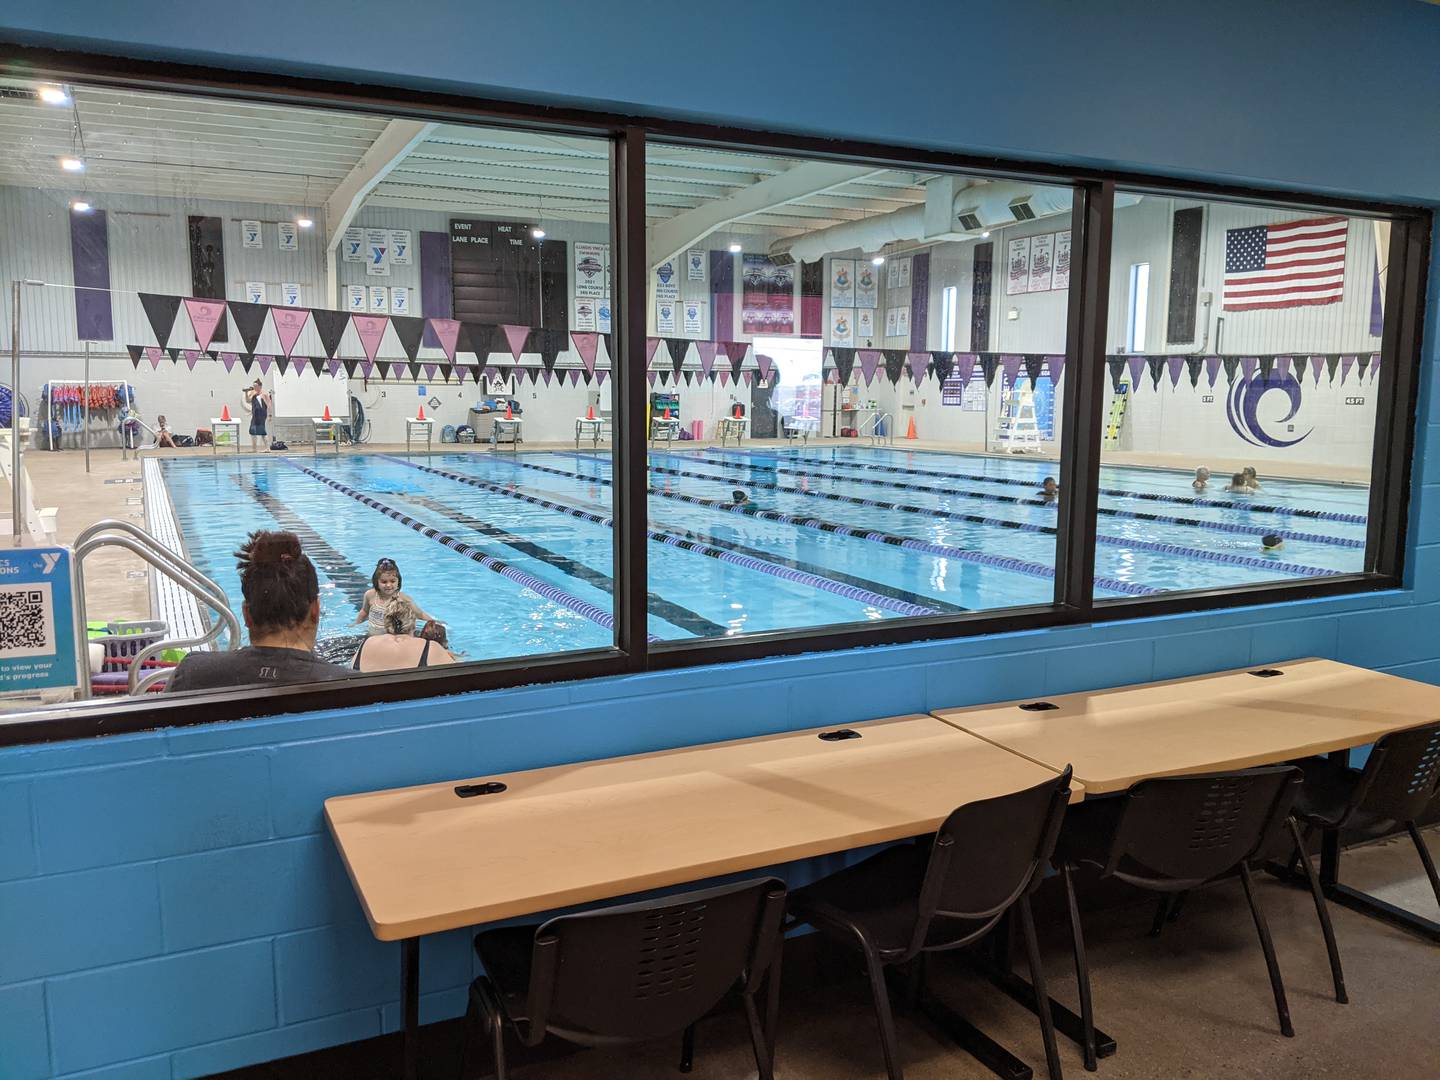 The project’s second phase includes an indoor, Olympic-sized pool that will be twice the size of the pool at its Plano location.